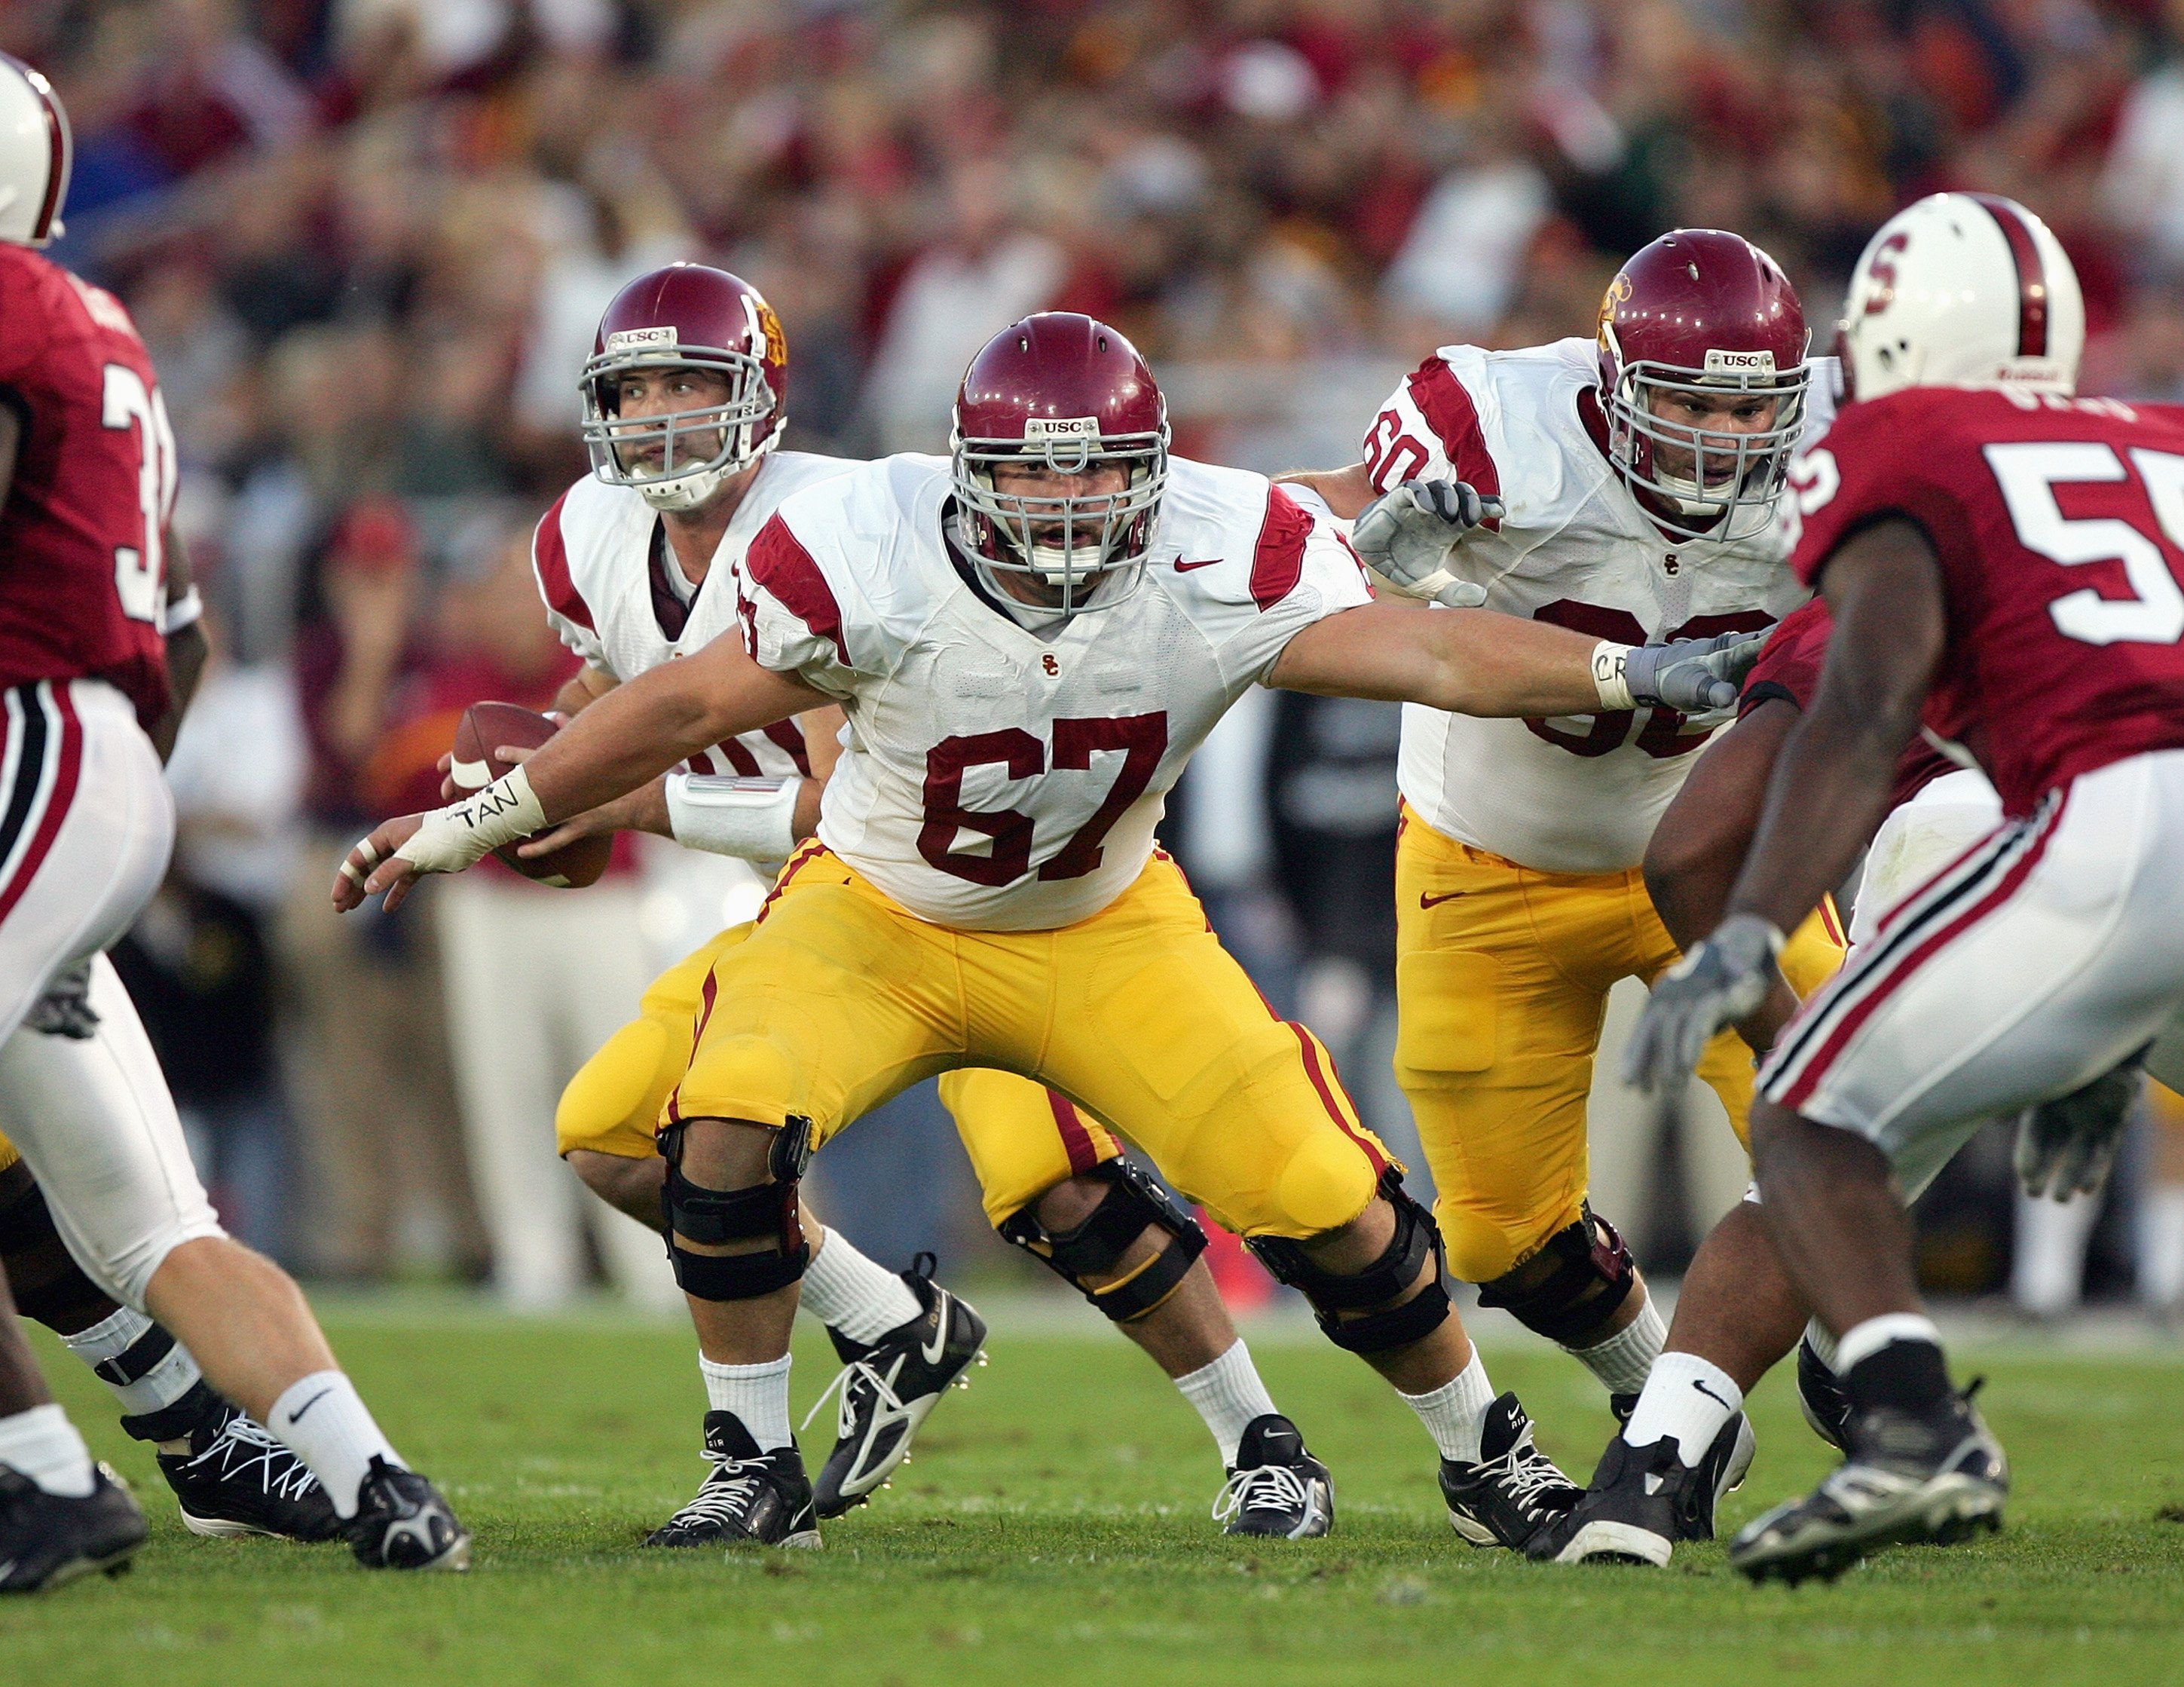 Greatest Players in USC Football History: The All-Time All-Trojans Team | Bleacher Report